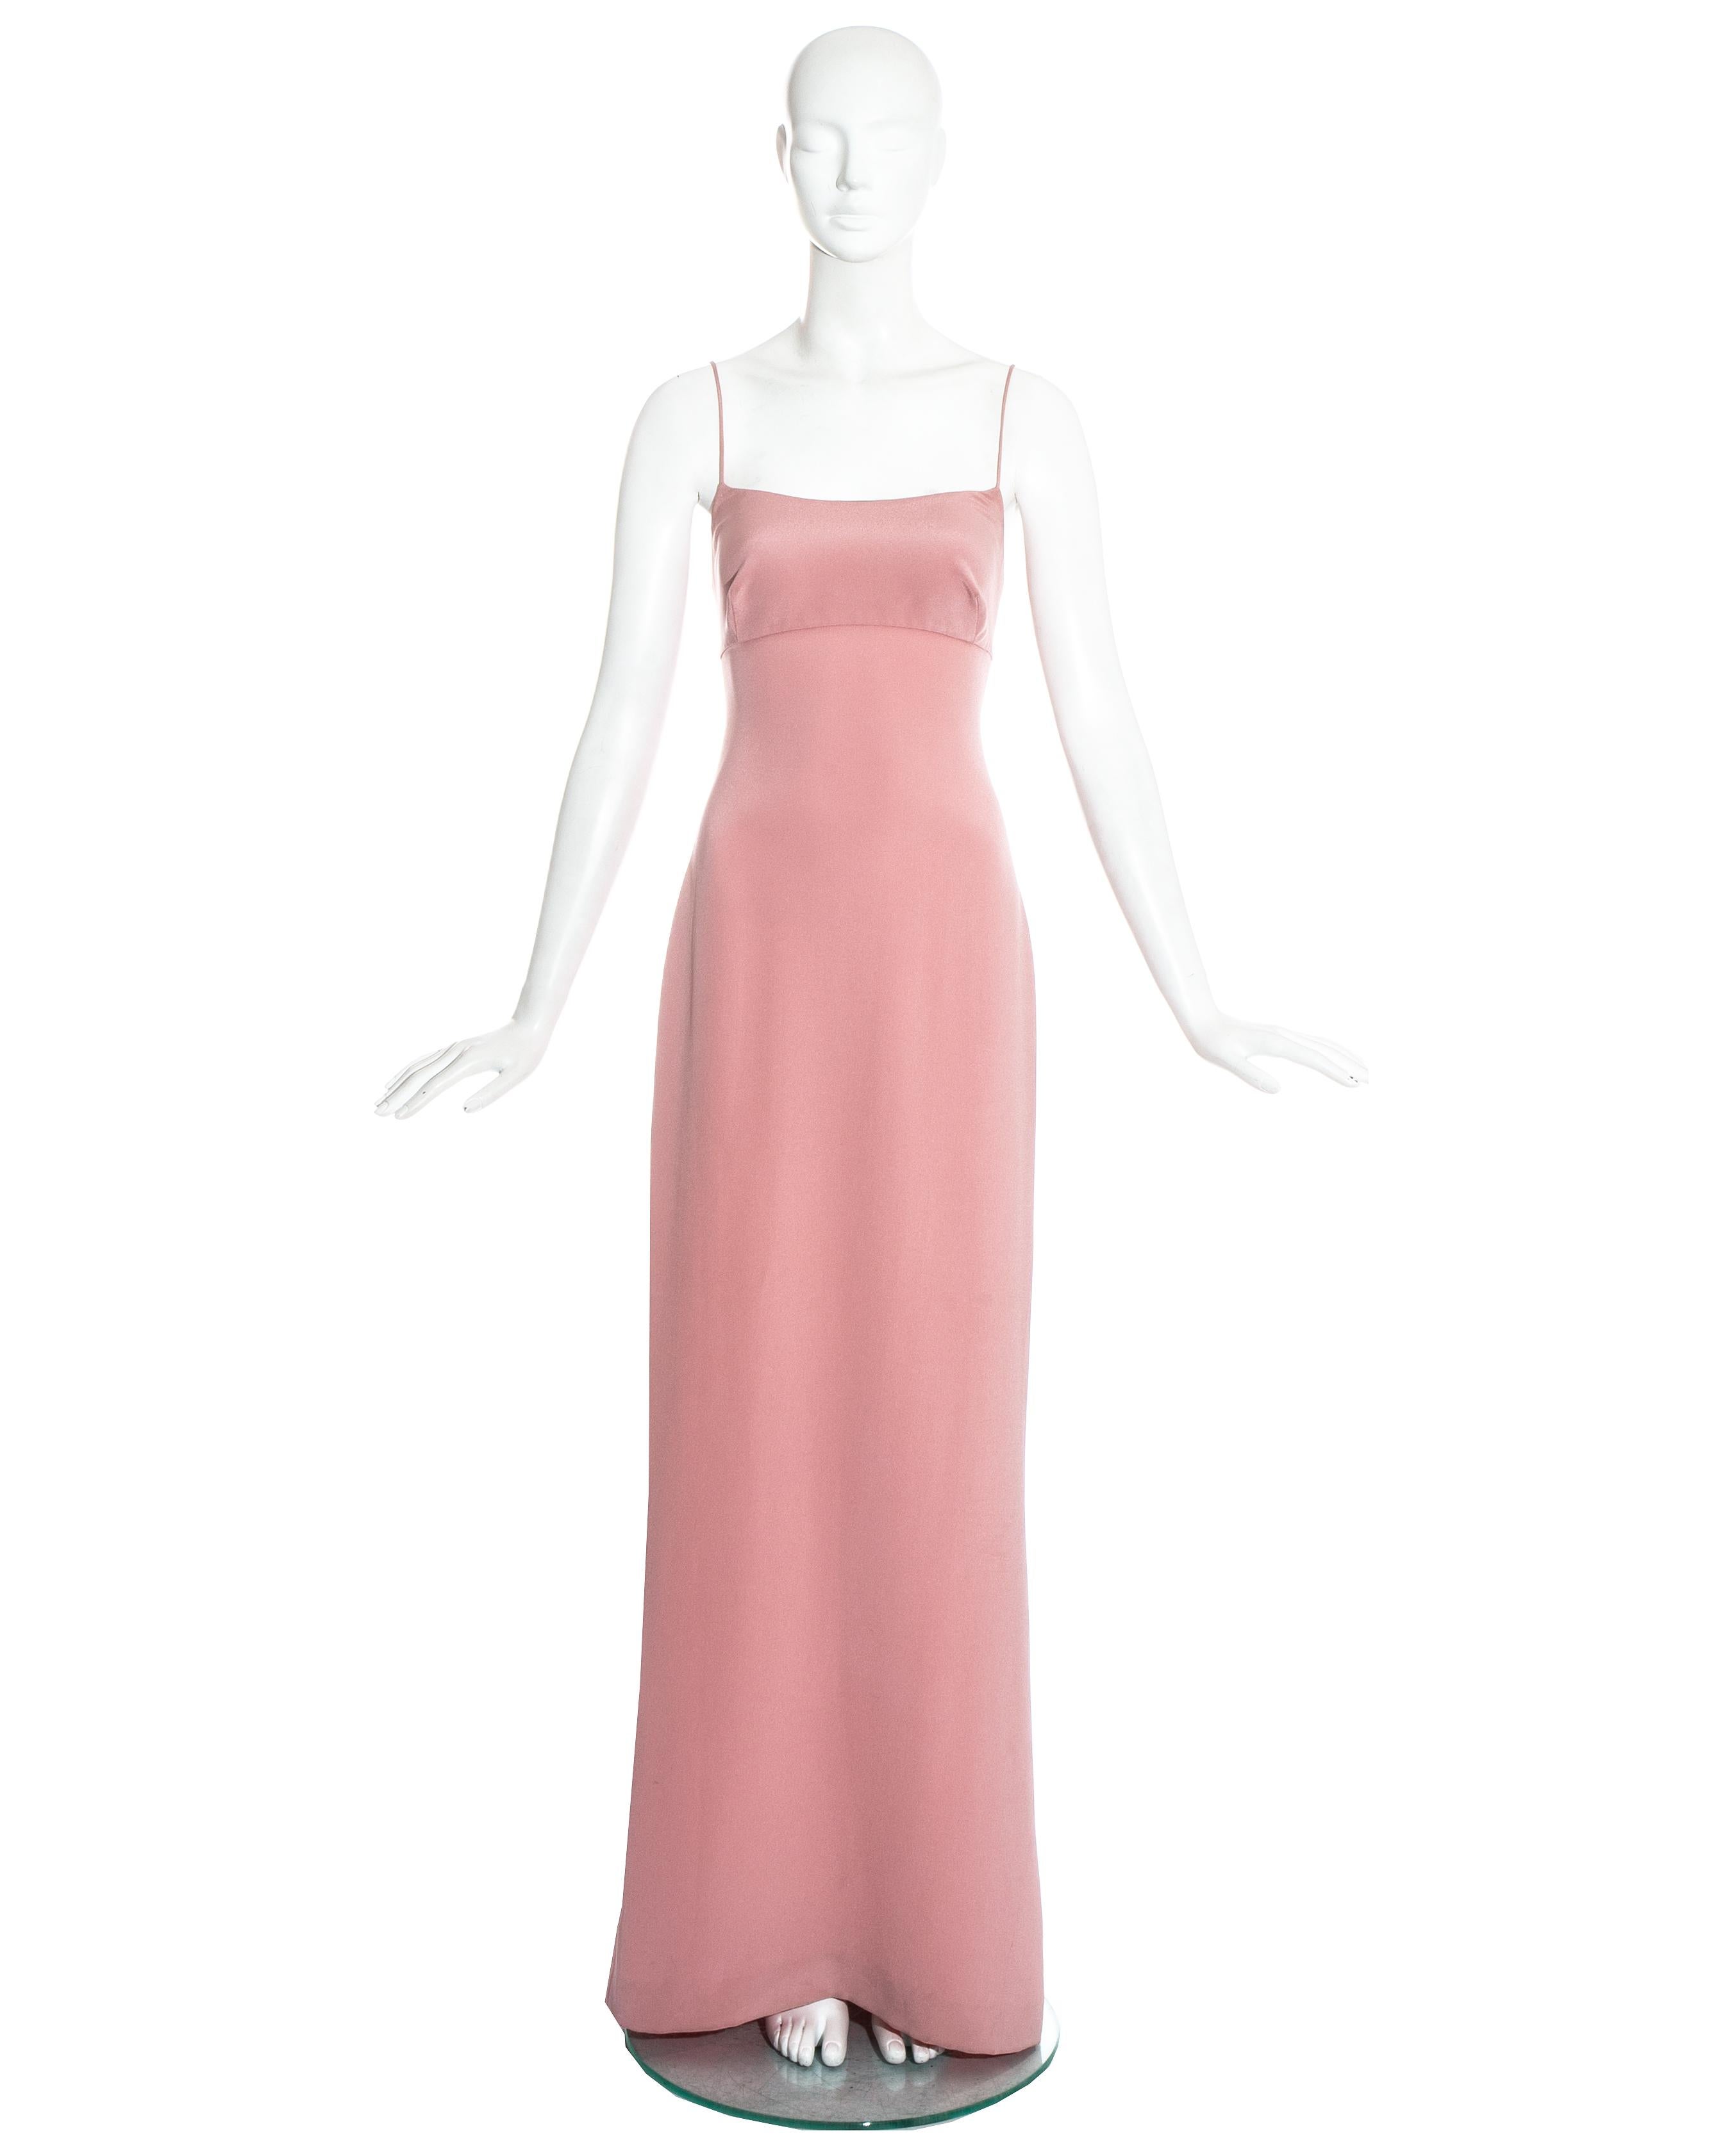 Dolce & Gabbana baby pink silk maxi dress with spaghetti straps and leg slit at the back

Spring-Summer 1995